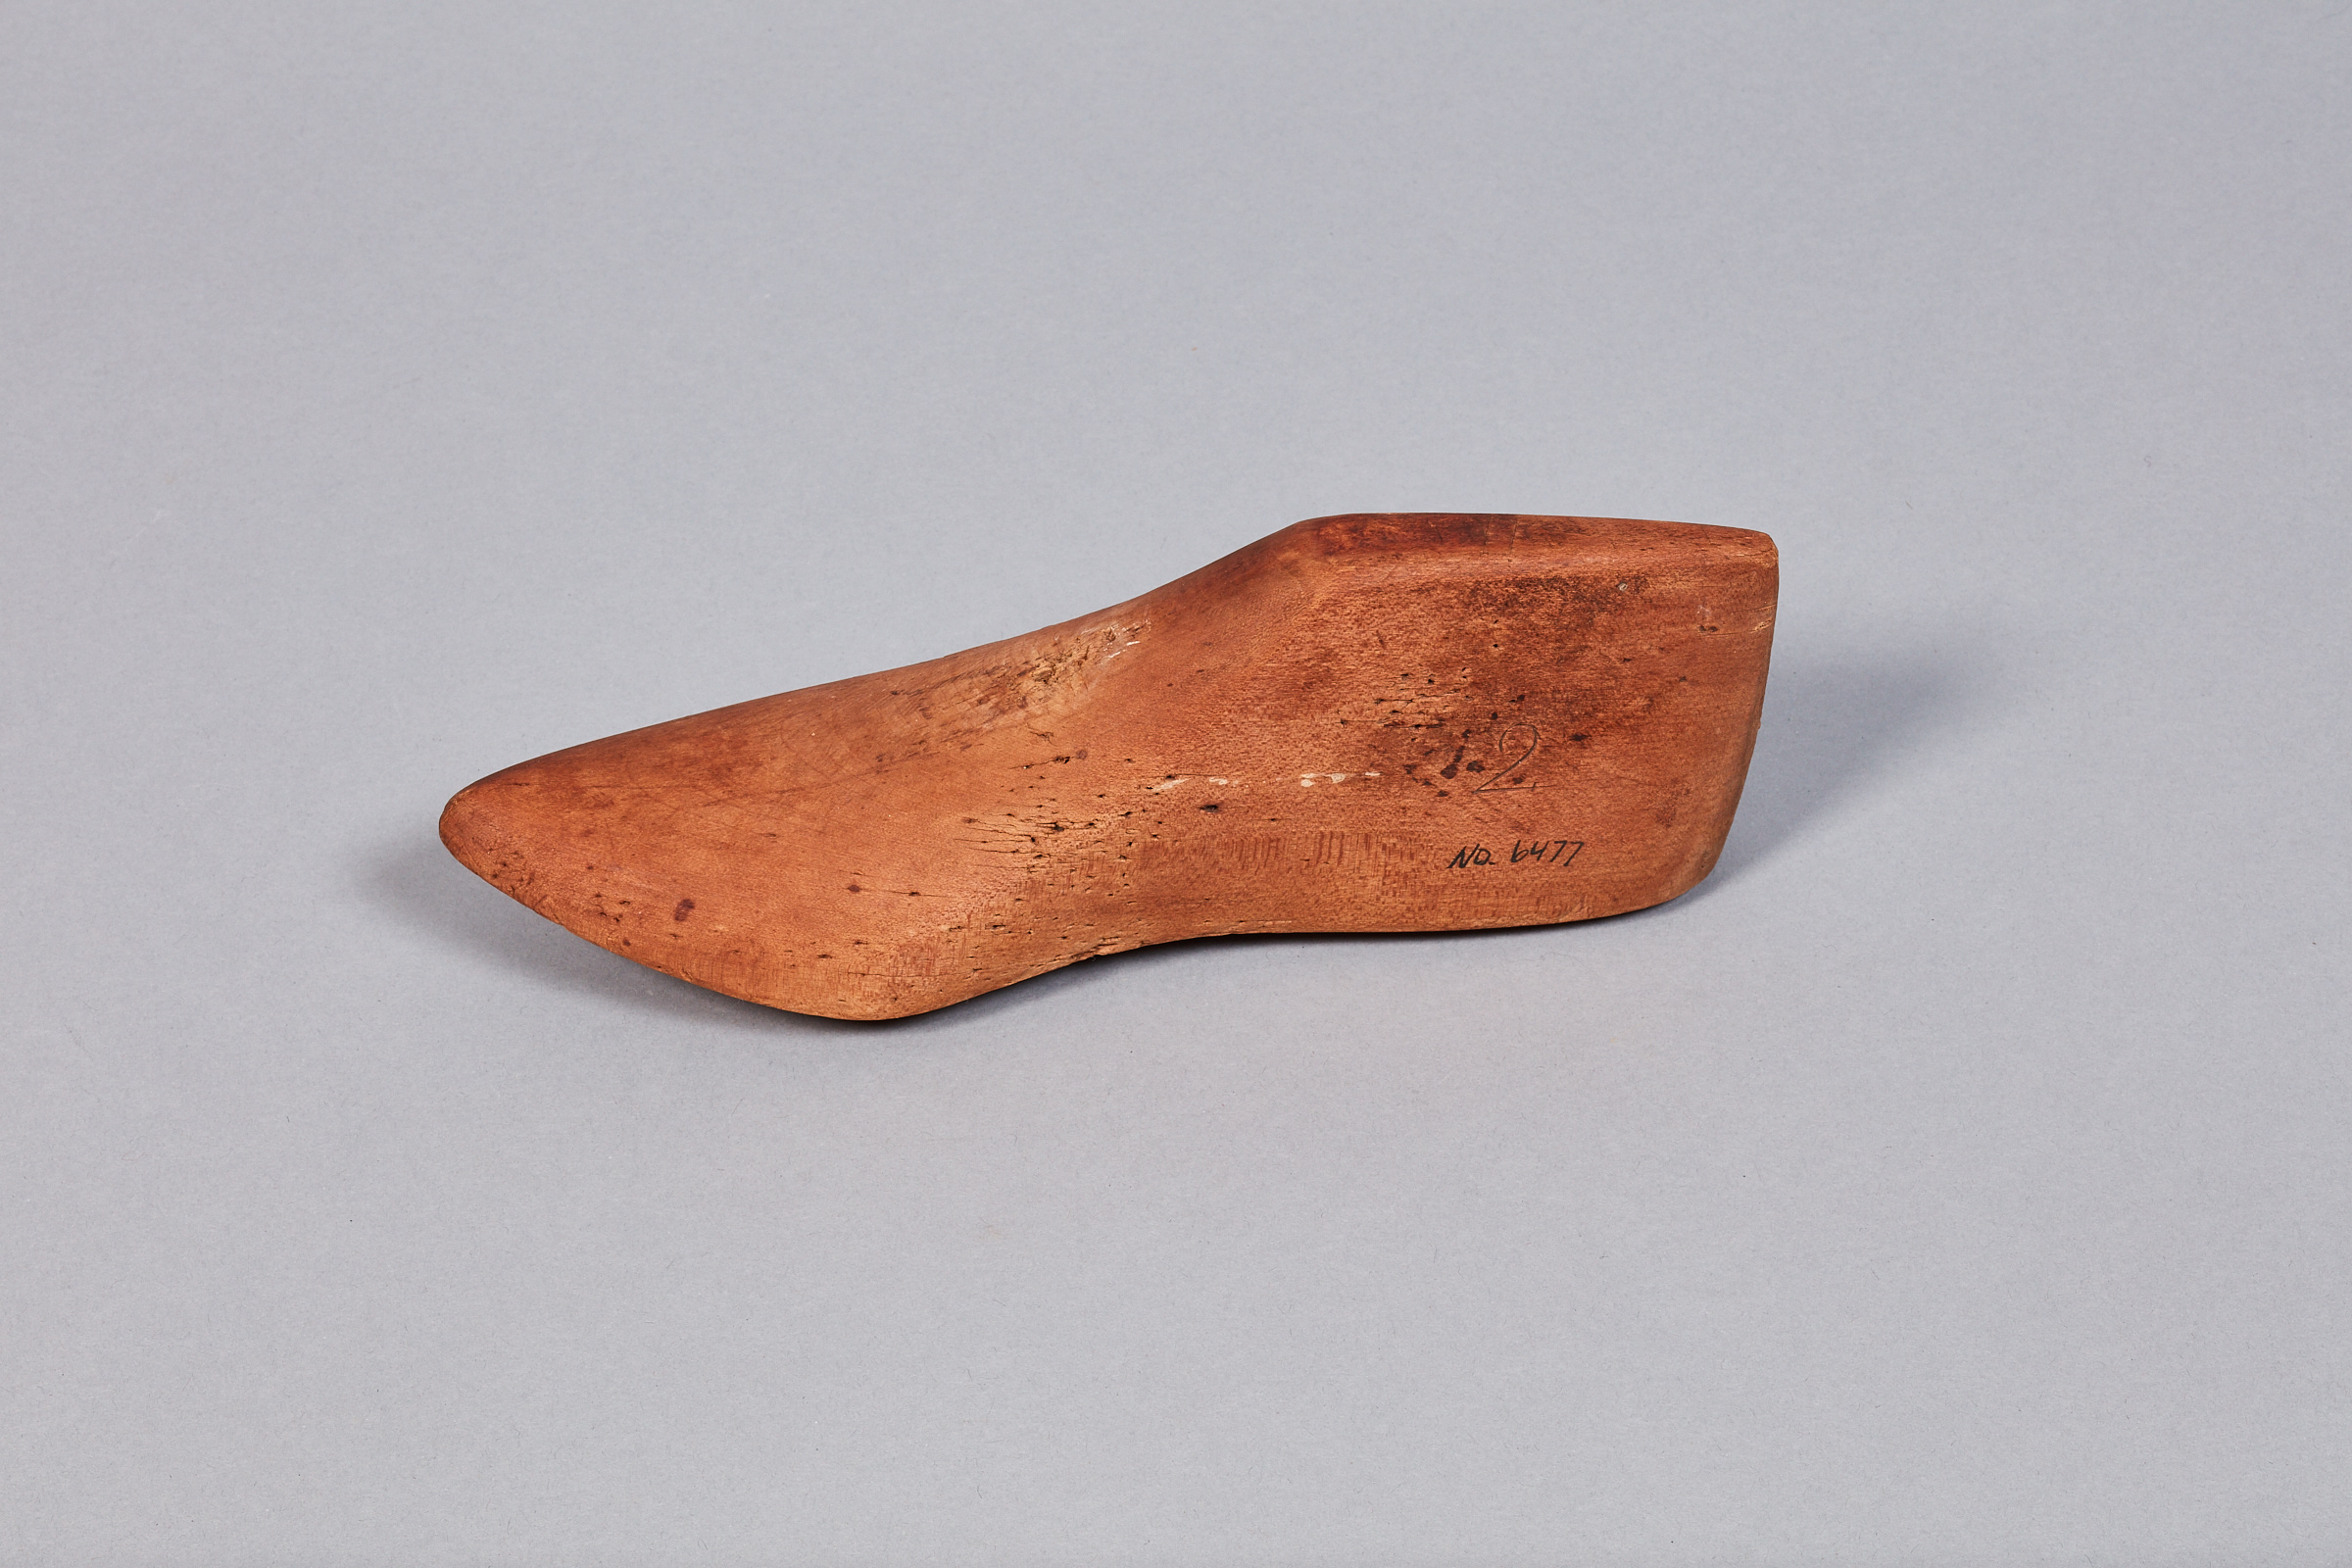 A small wooden shoe on a grey surface.